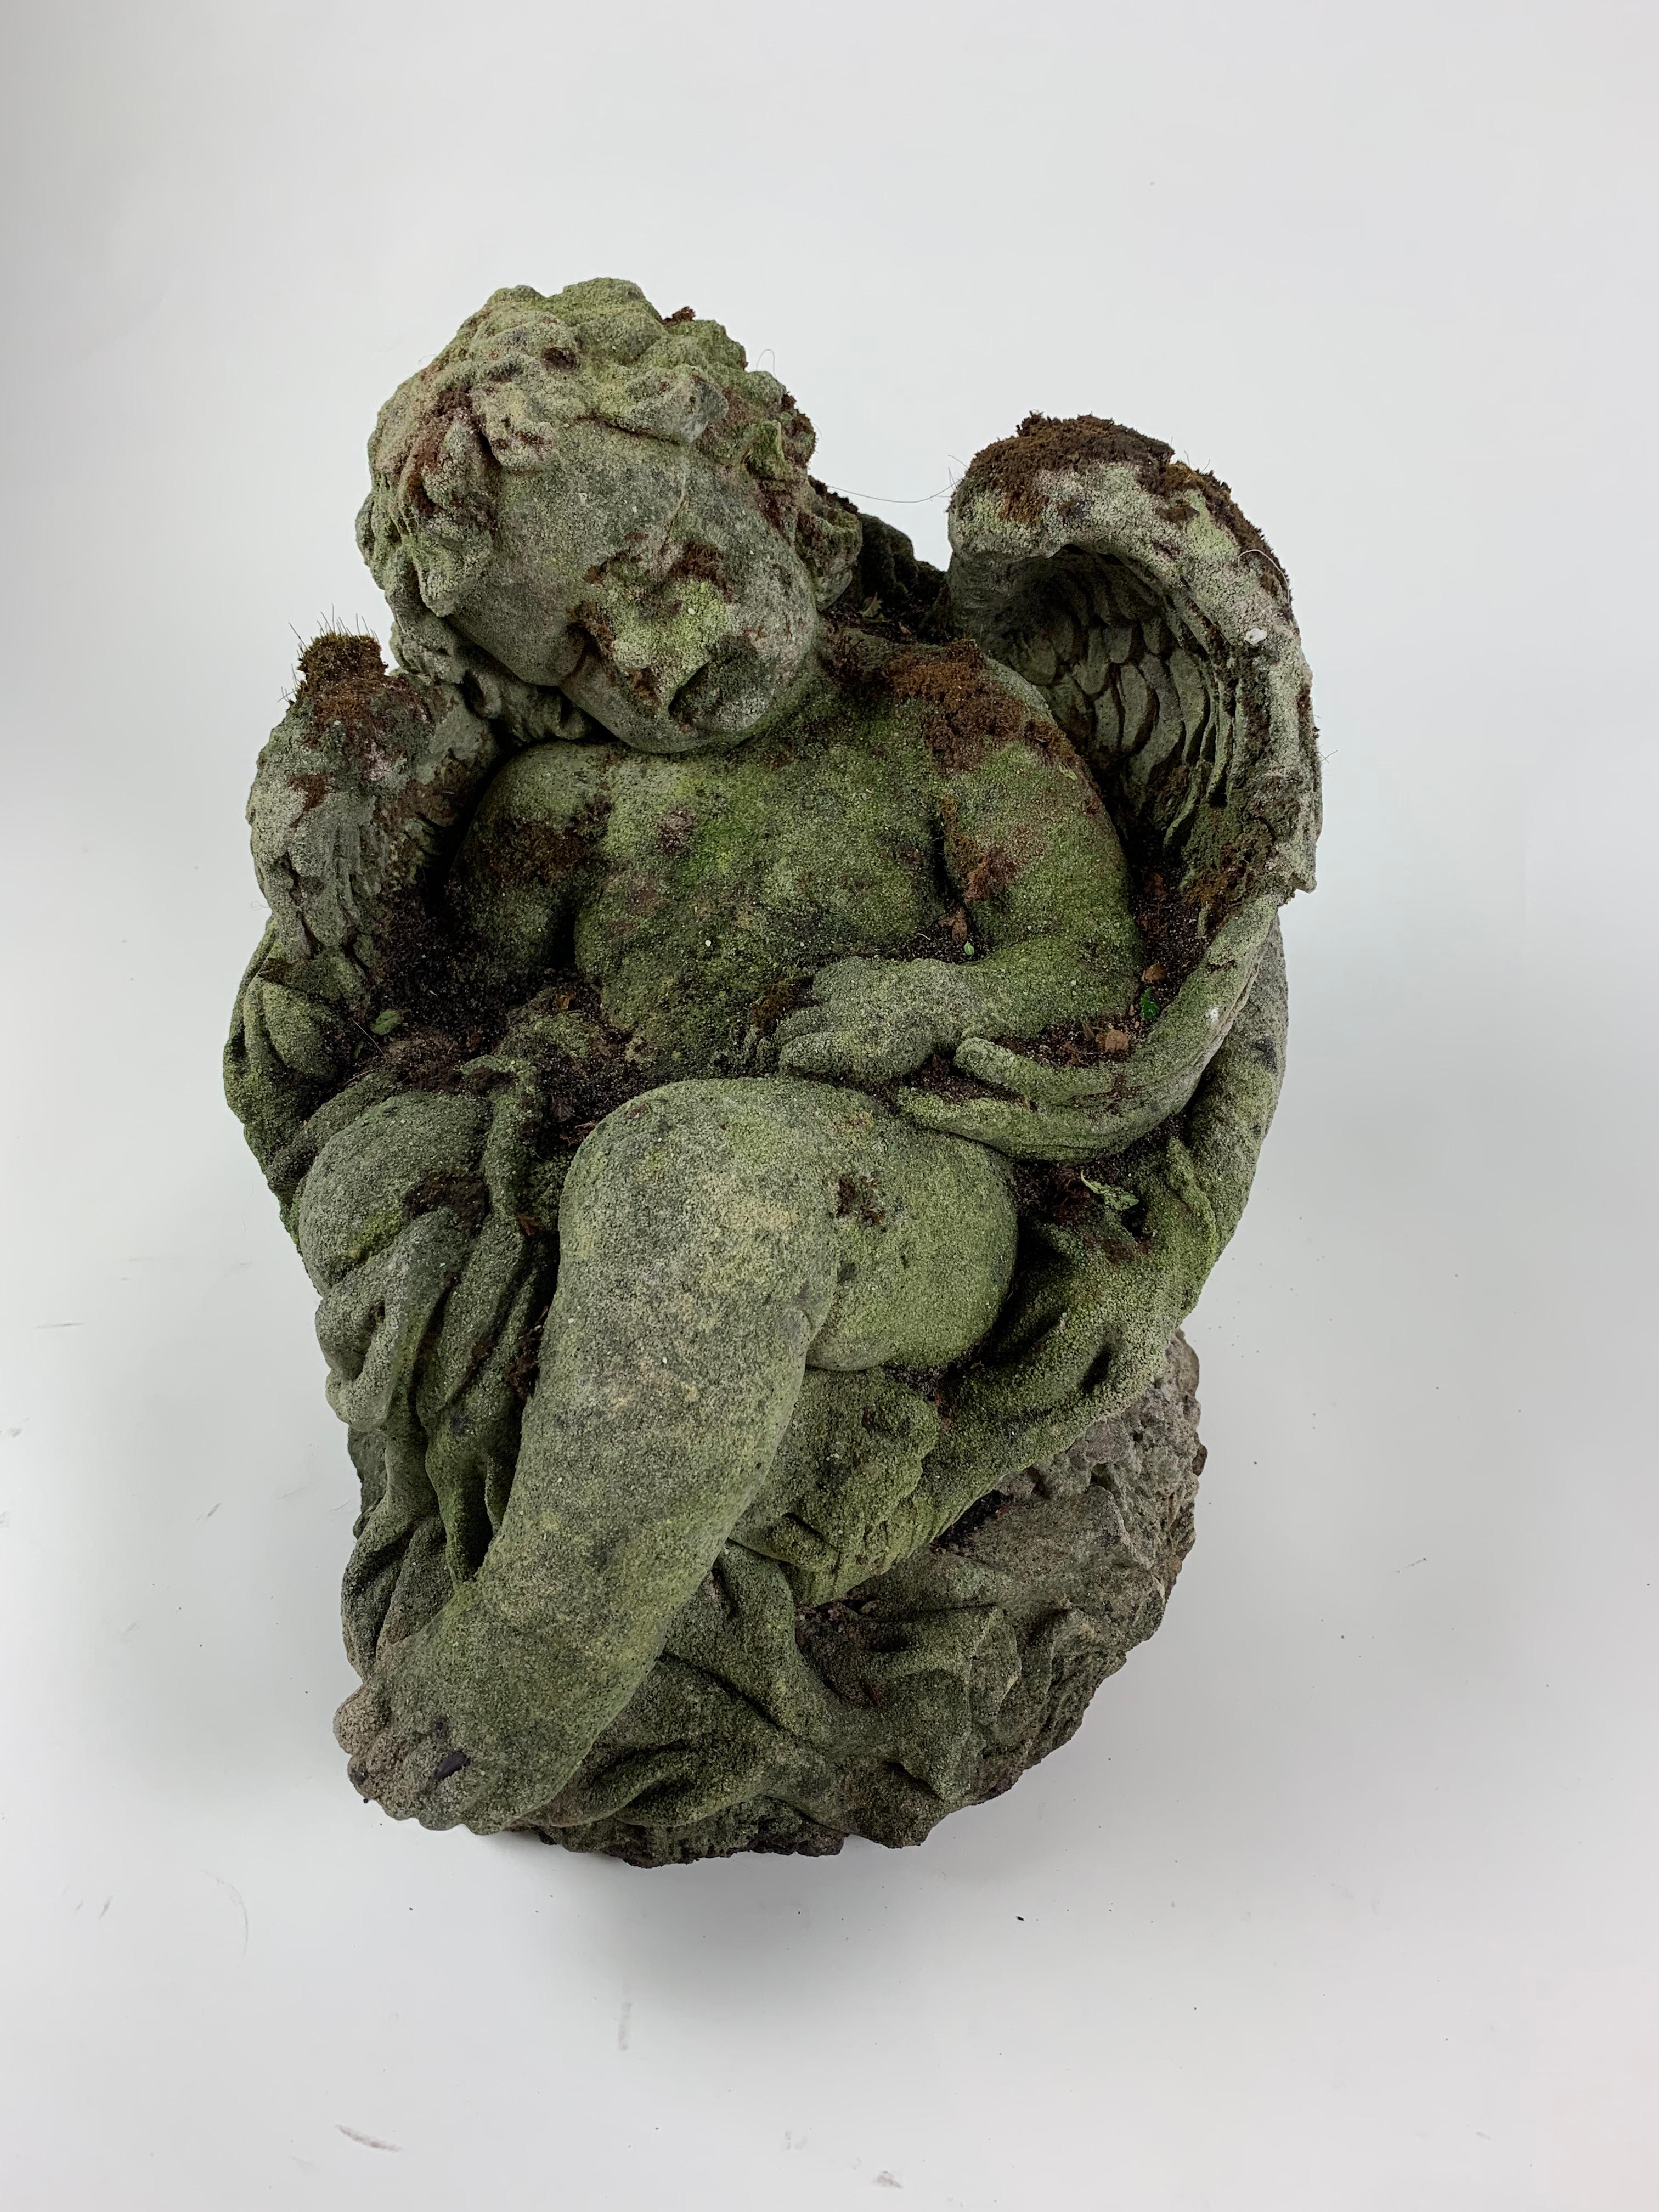 Vintage stone Cherub from Shardeloes Country House in Amersham. Circa 1930s. Beautifully aged and mossy. In good condition. Stunning addition to garden decoration.